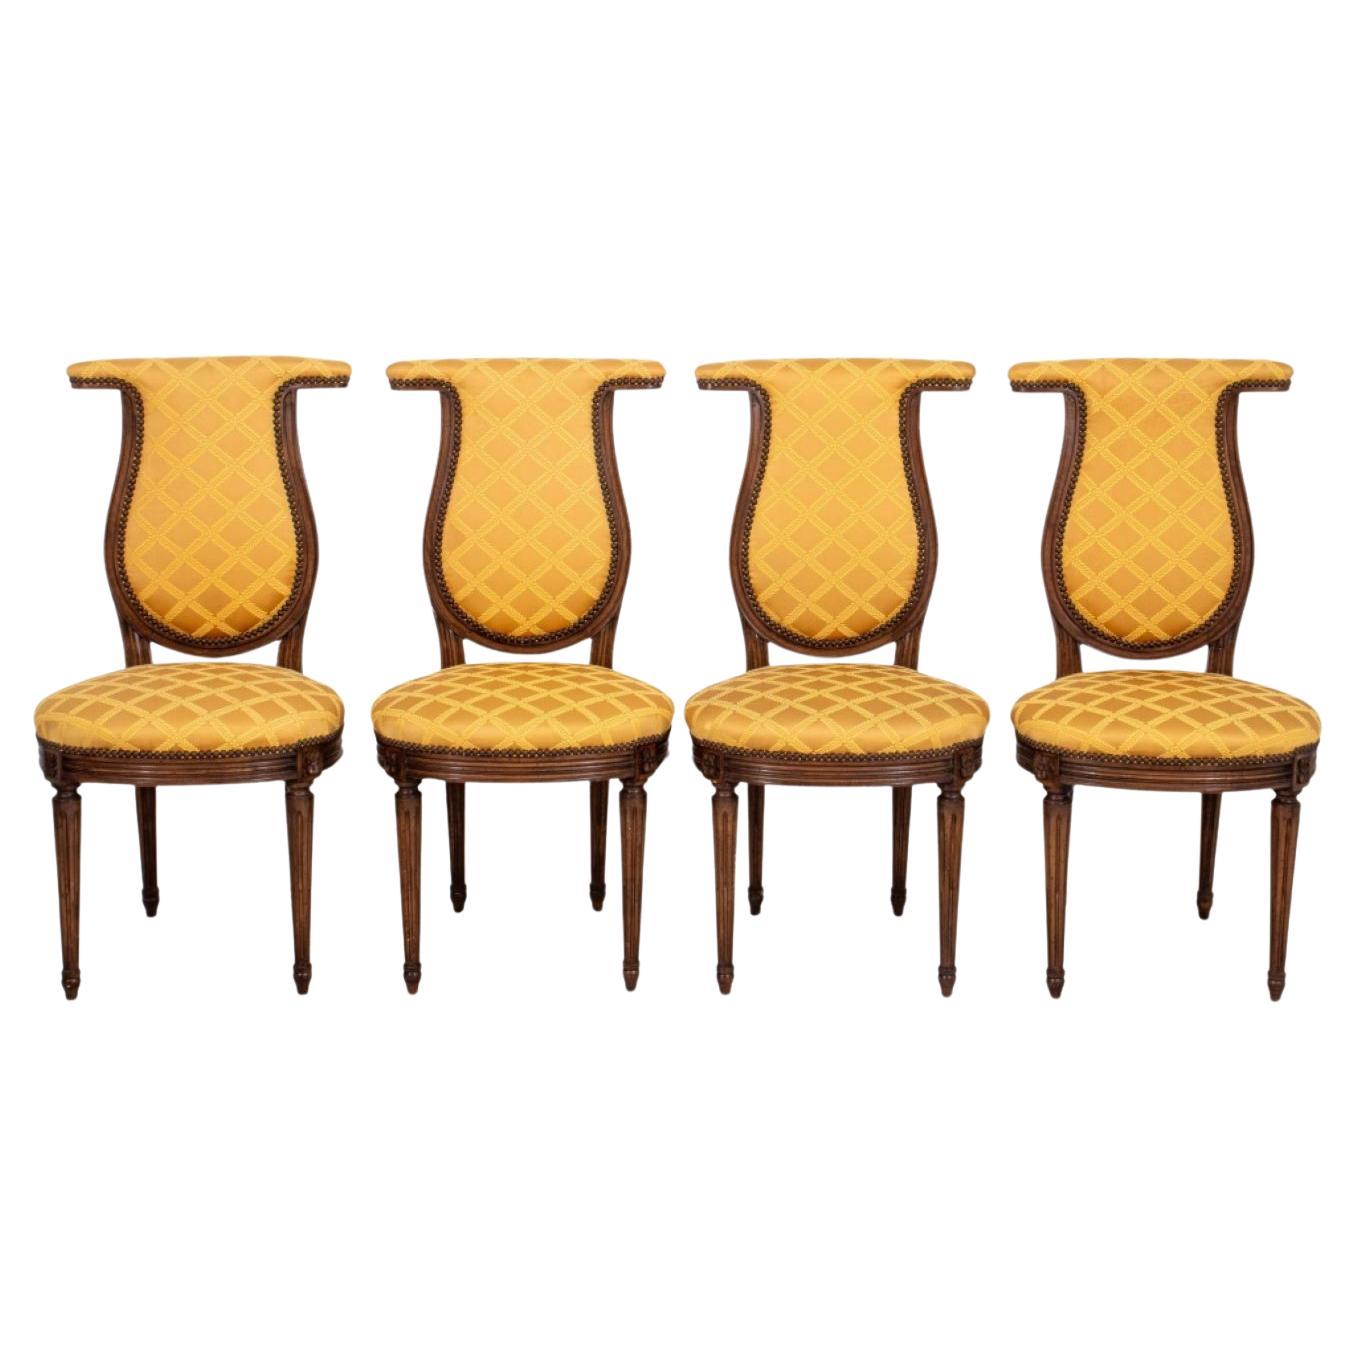 Louis XVI Style 'Voyeuses' or Side Chairs, 4